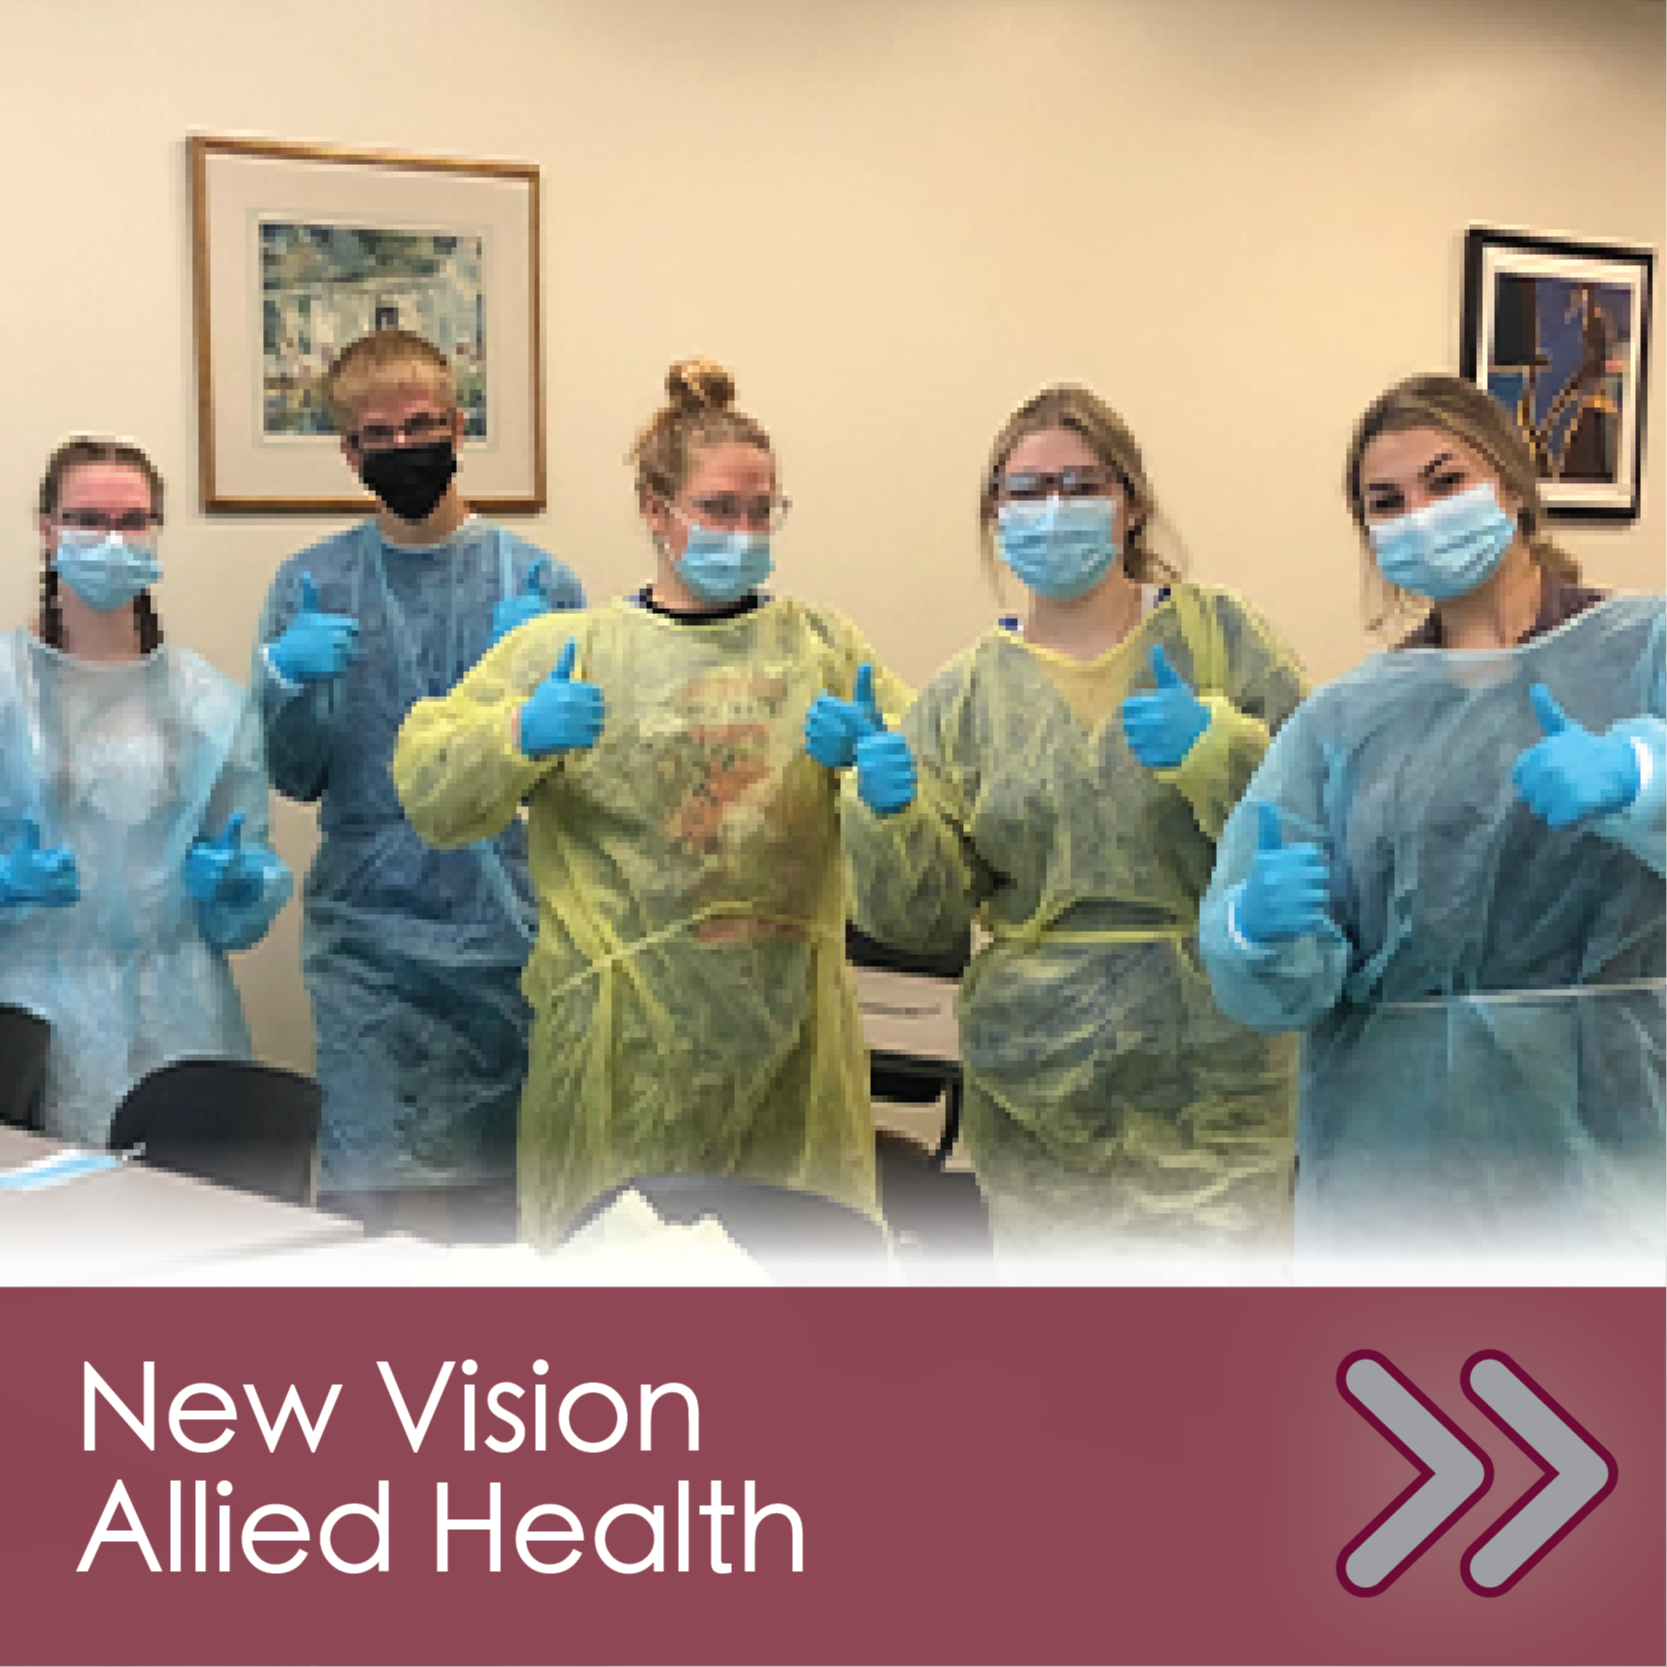 Group of healthcare students posing for photo in ppe